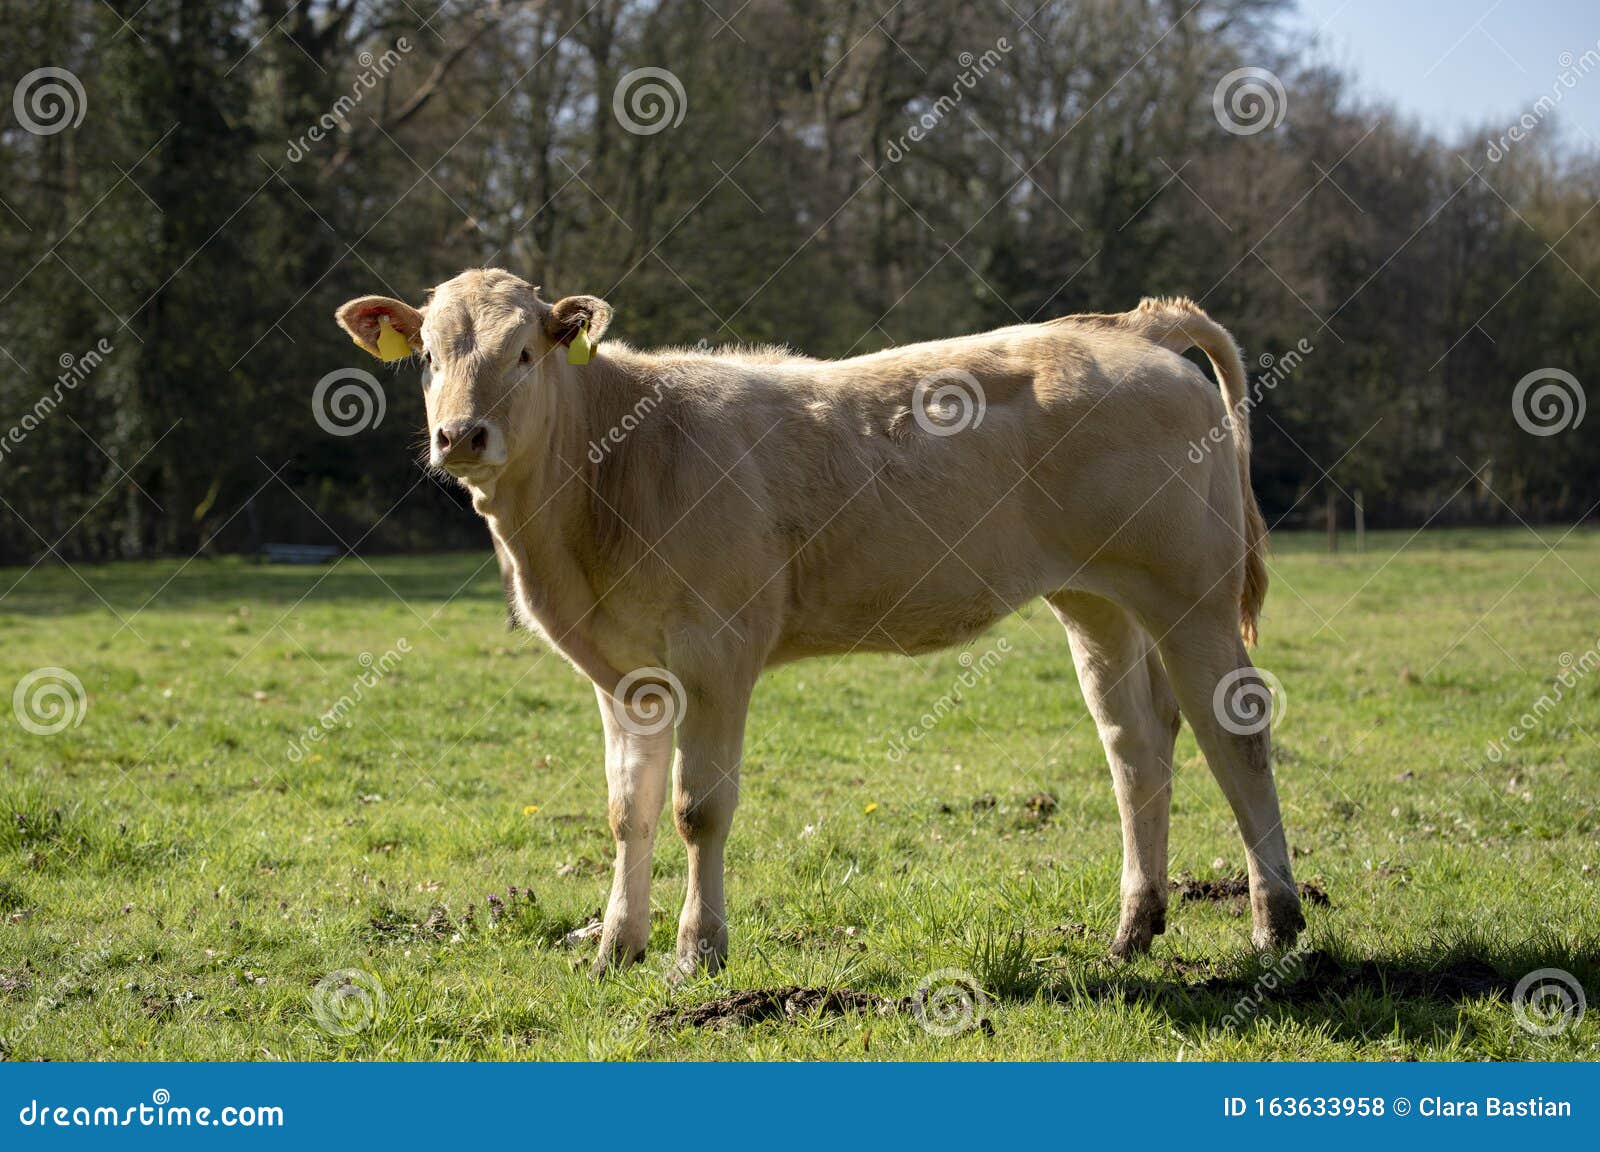 blonde cow, heifer, standing perky on green grass in a meadow, pasture, trees at the background